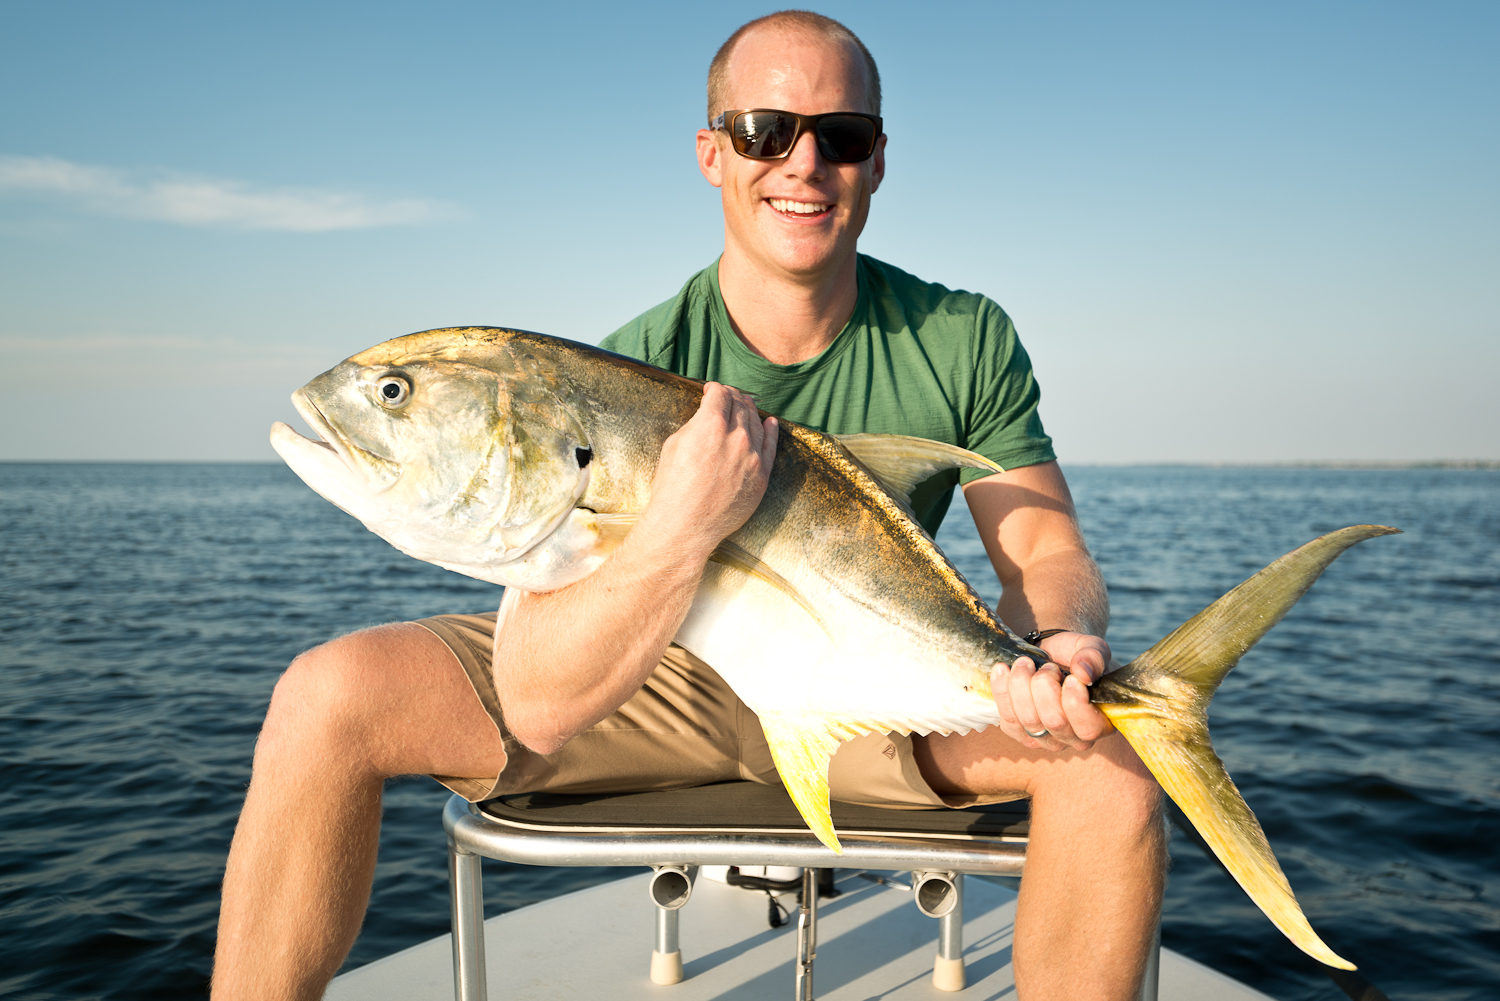 Southern-Fly-Expeditions-NickLitchfield-JackCrevalle-31Aug2015-2.jpg